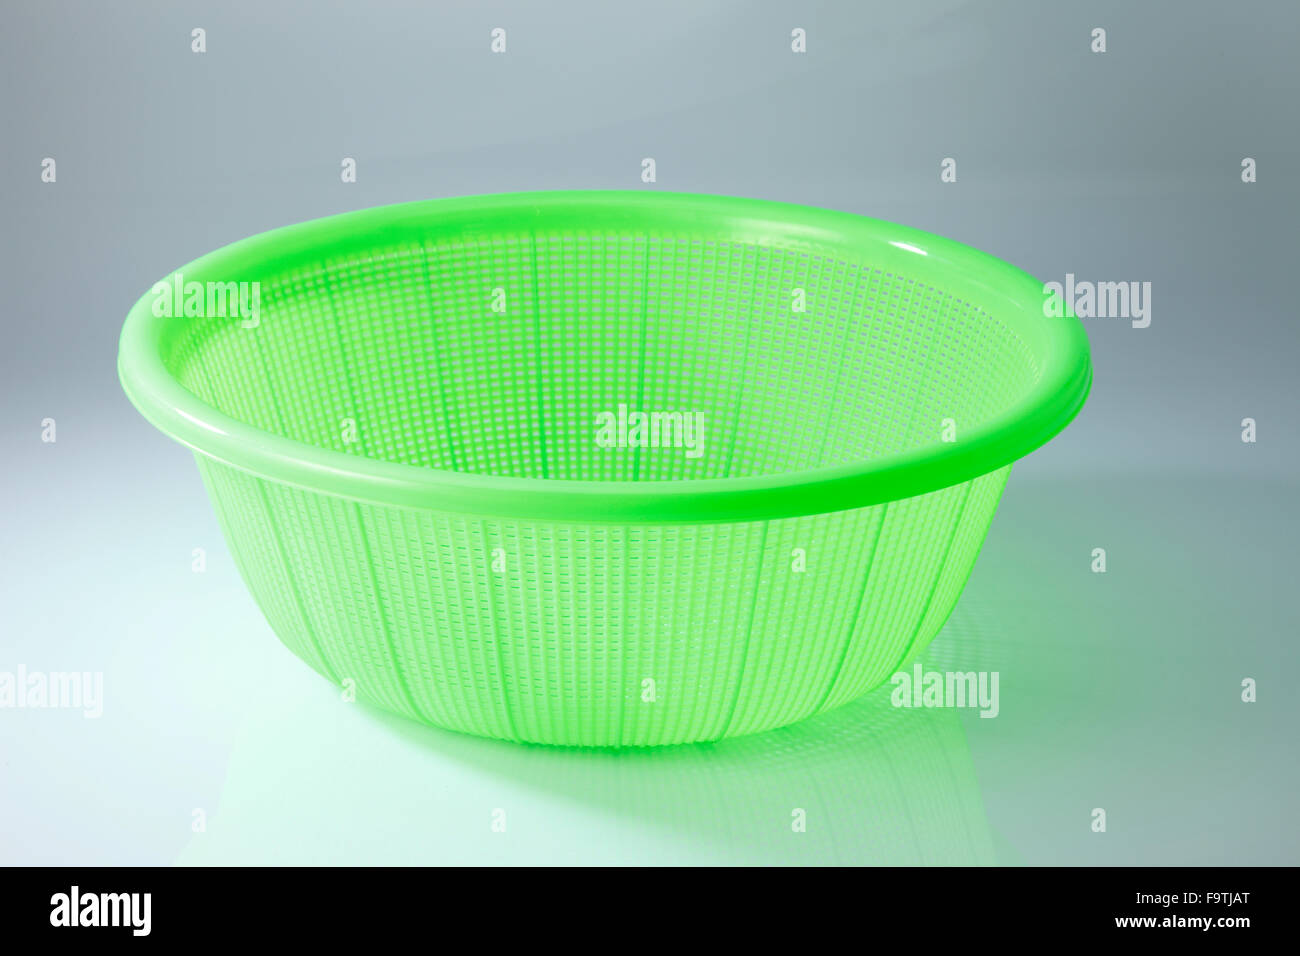 green plastic basket on a white background Stock Photo